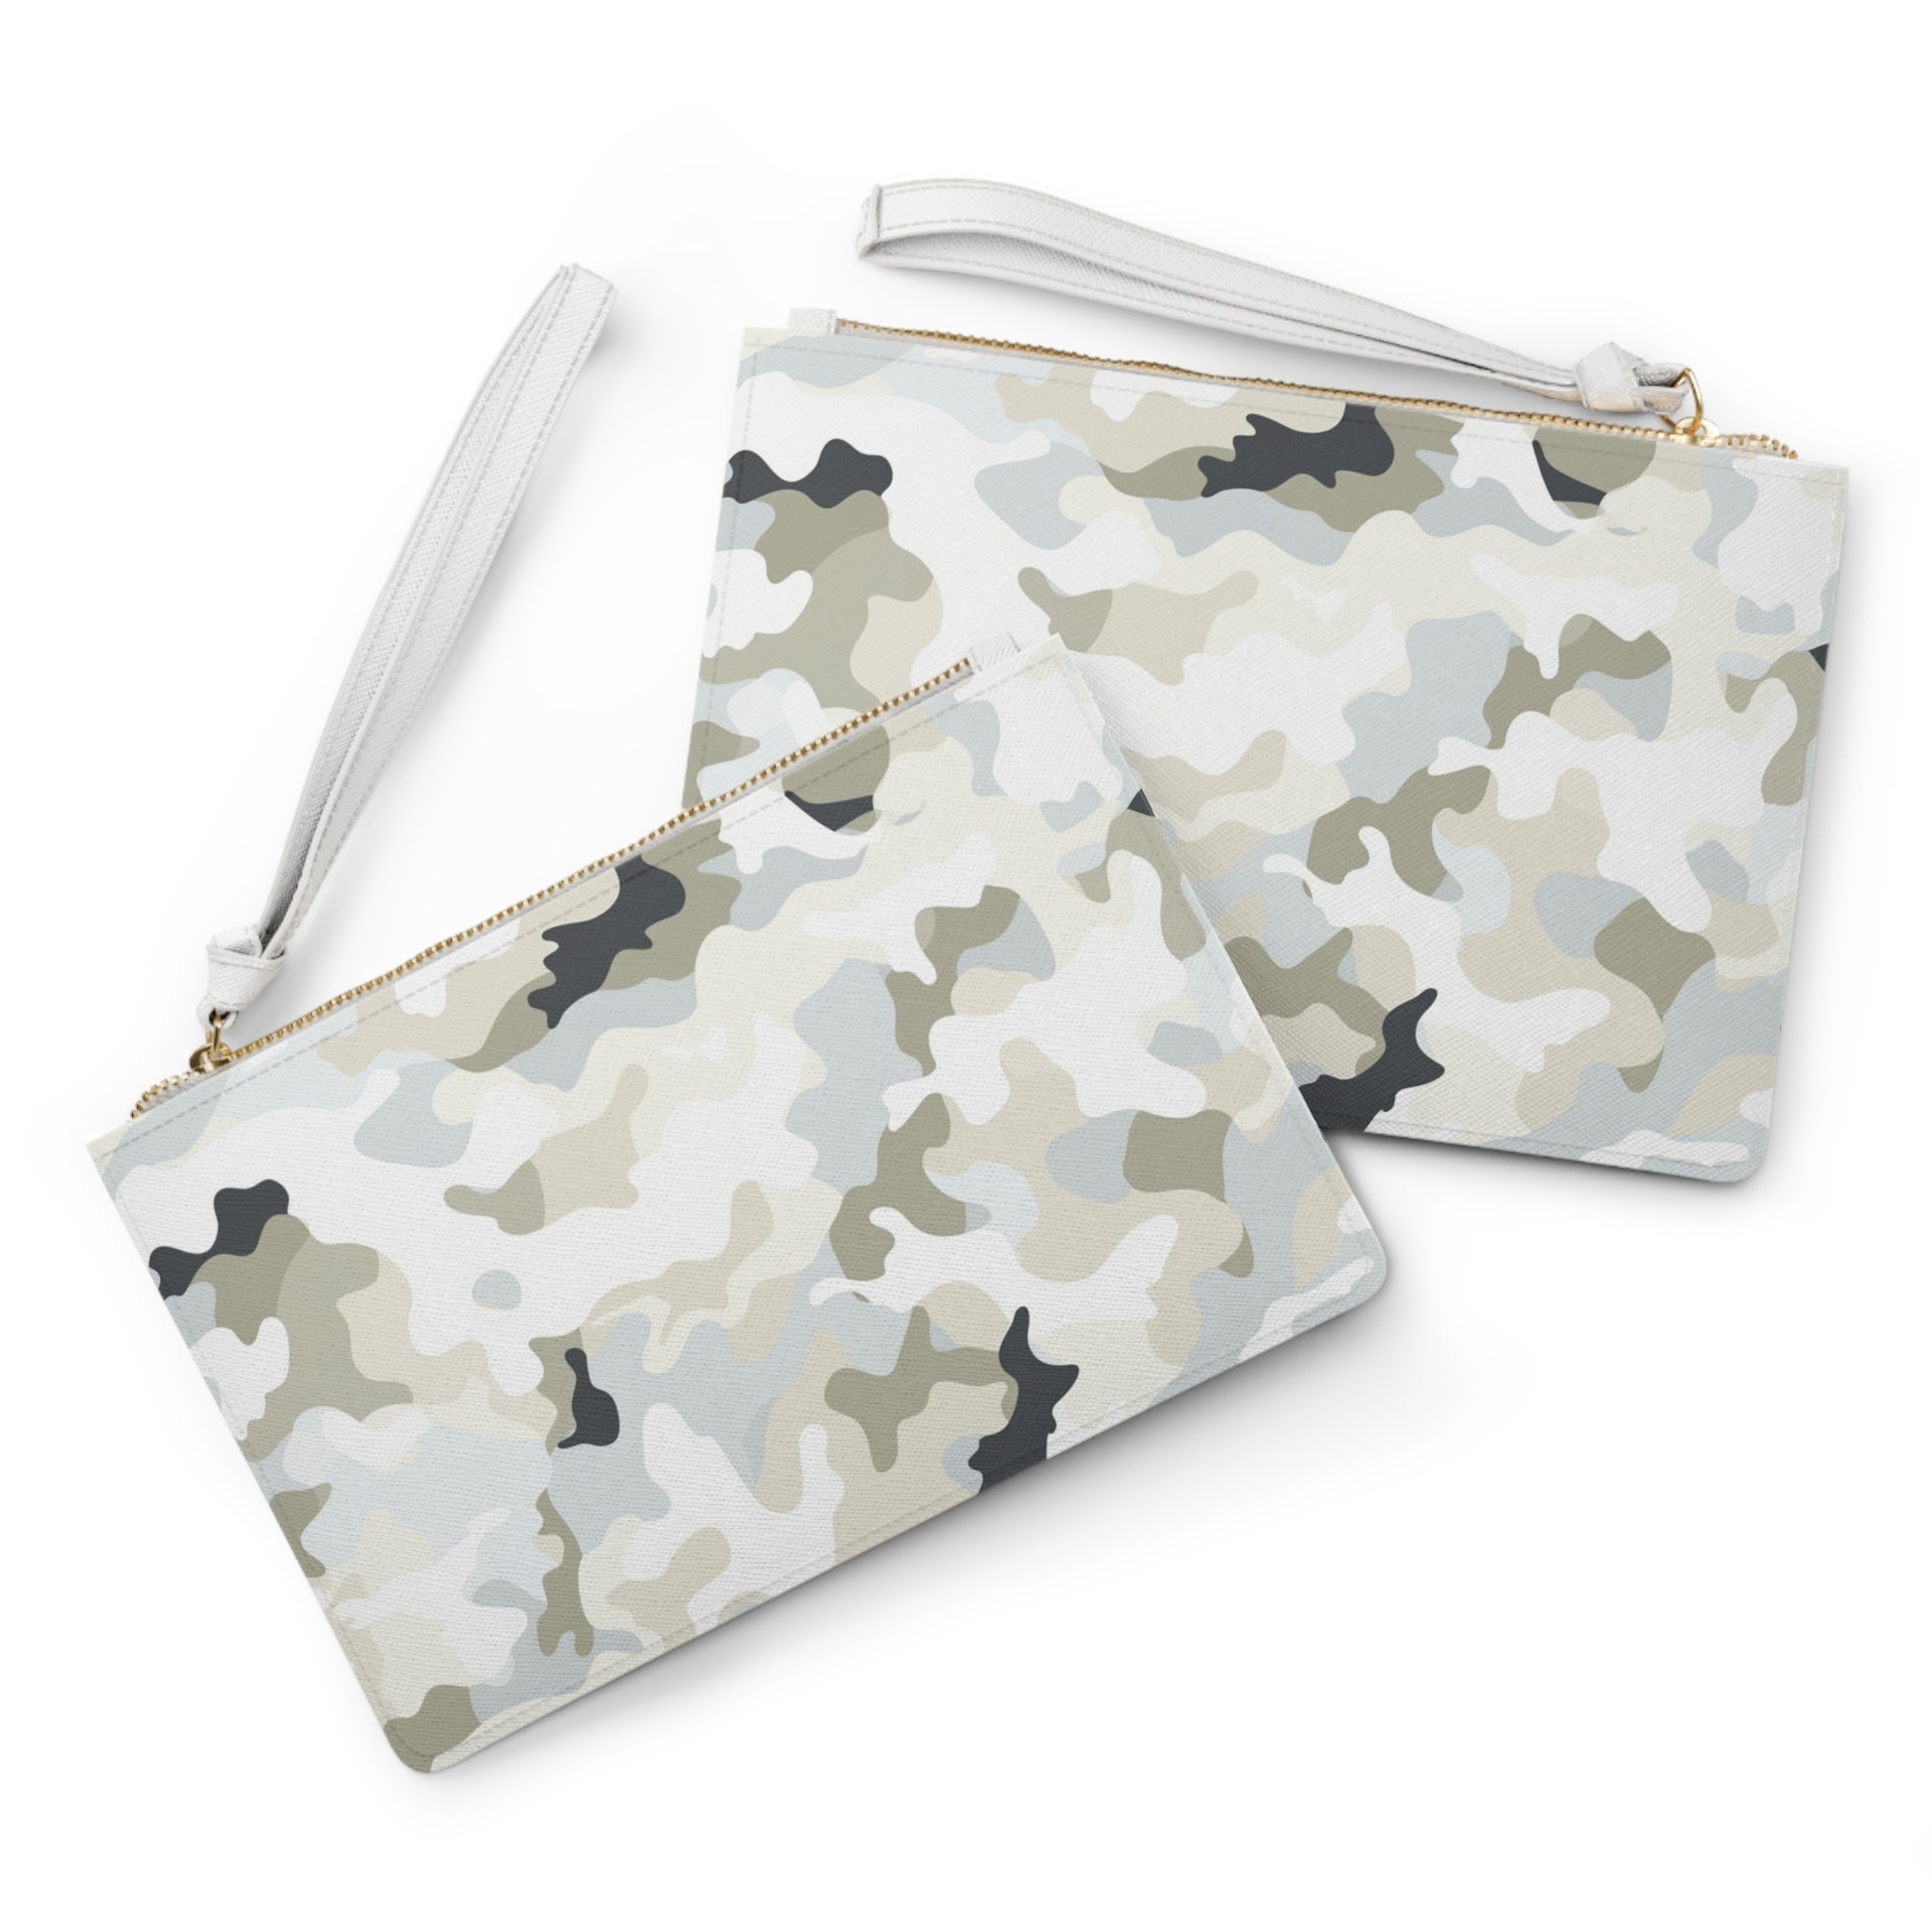 White Camo Clutch Wristlet Purse,  Camouflage Vegan Leather with Pocket Zipper Evening Modern Bag Strap Phone Wallet for Women Starcove Fashion